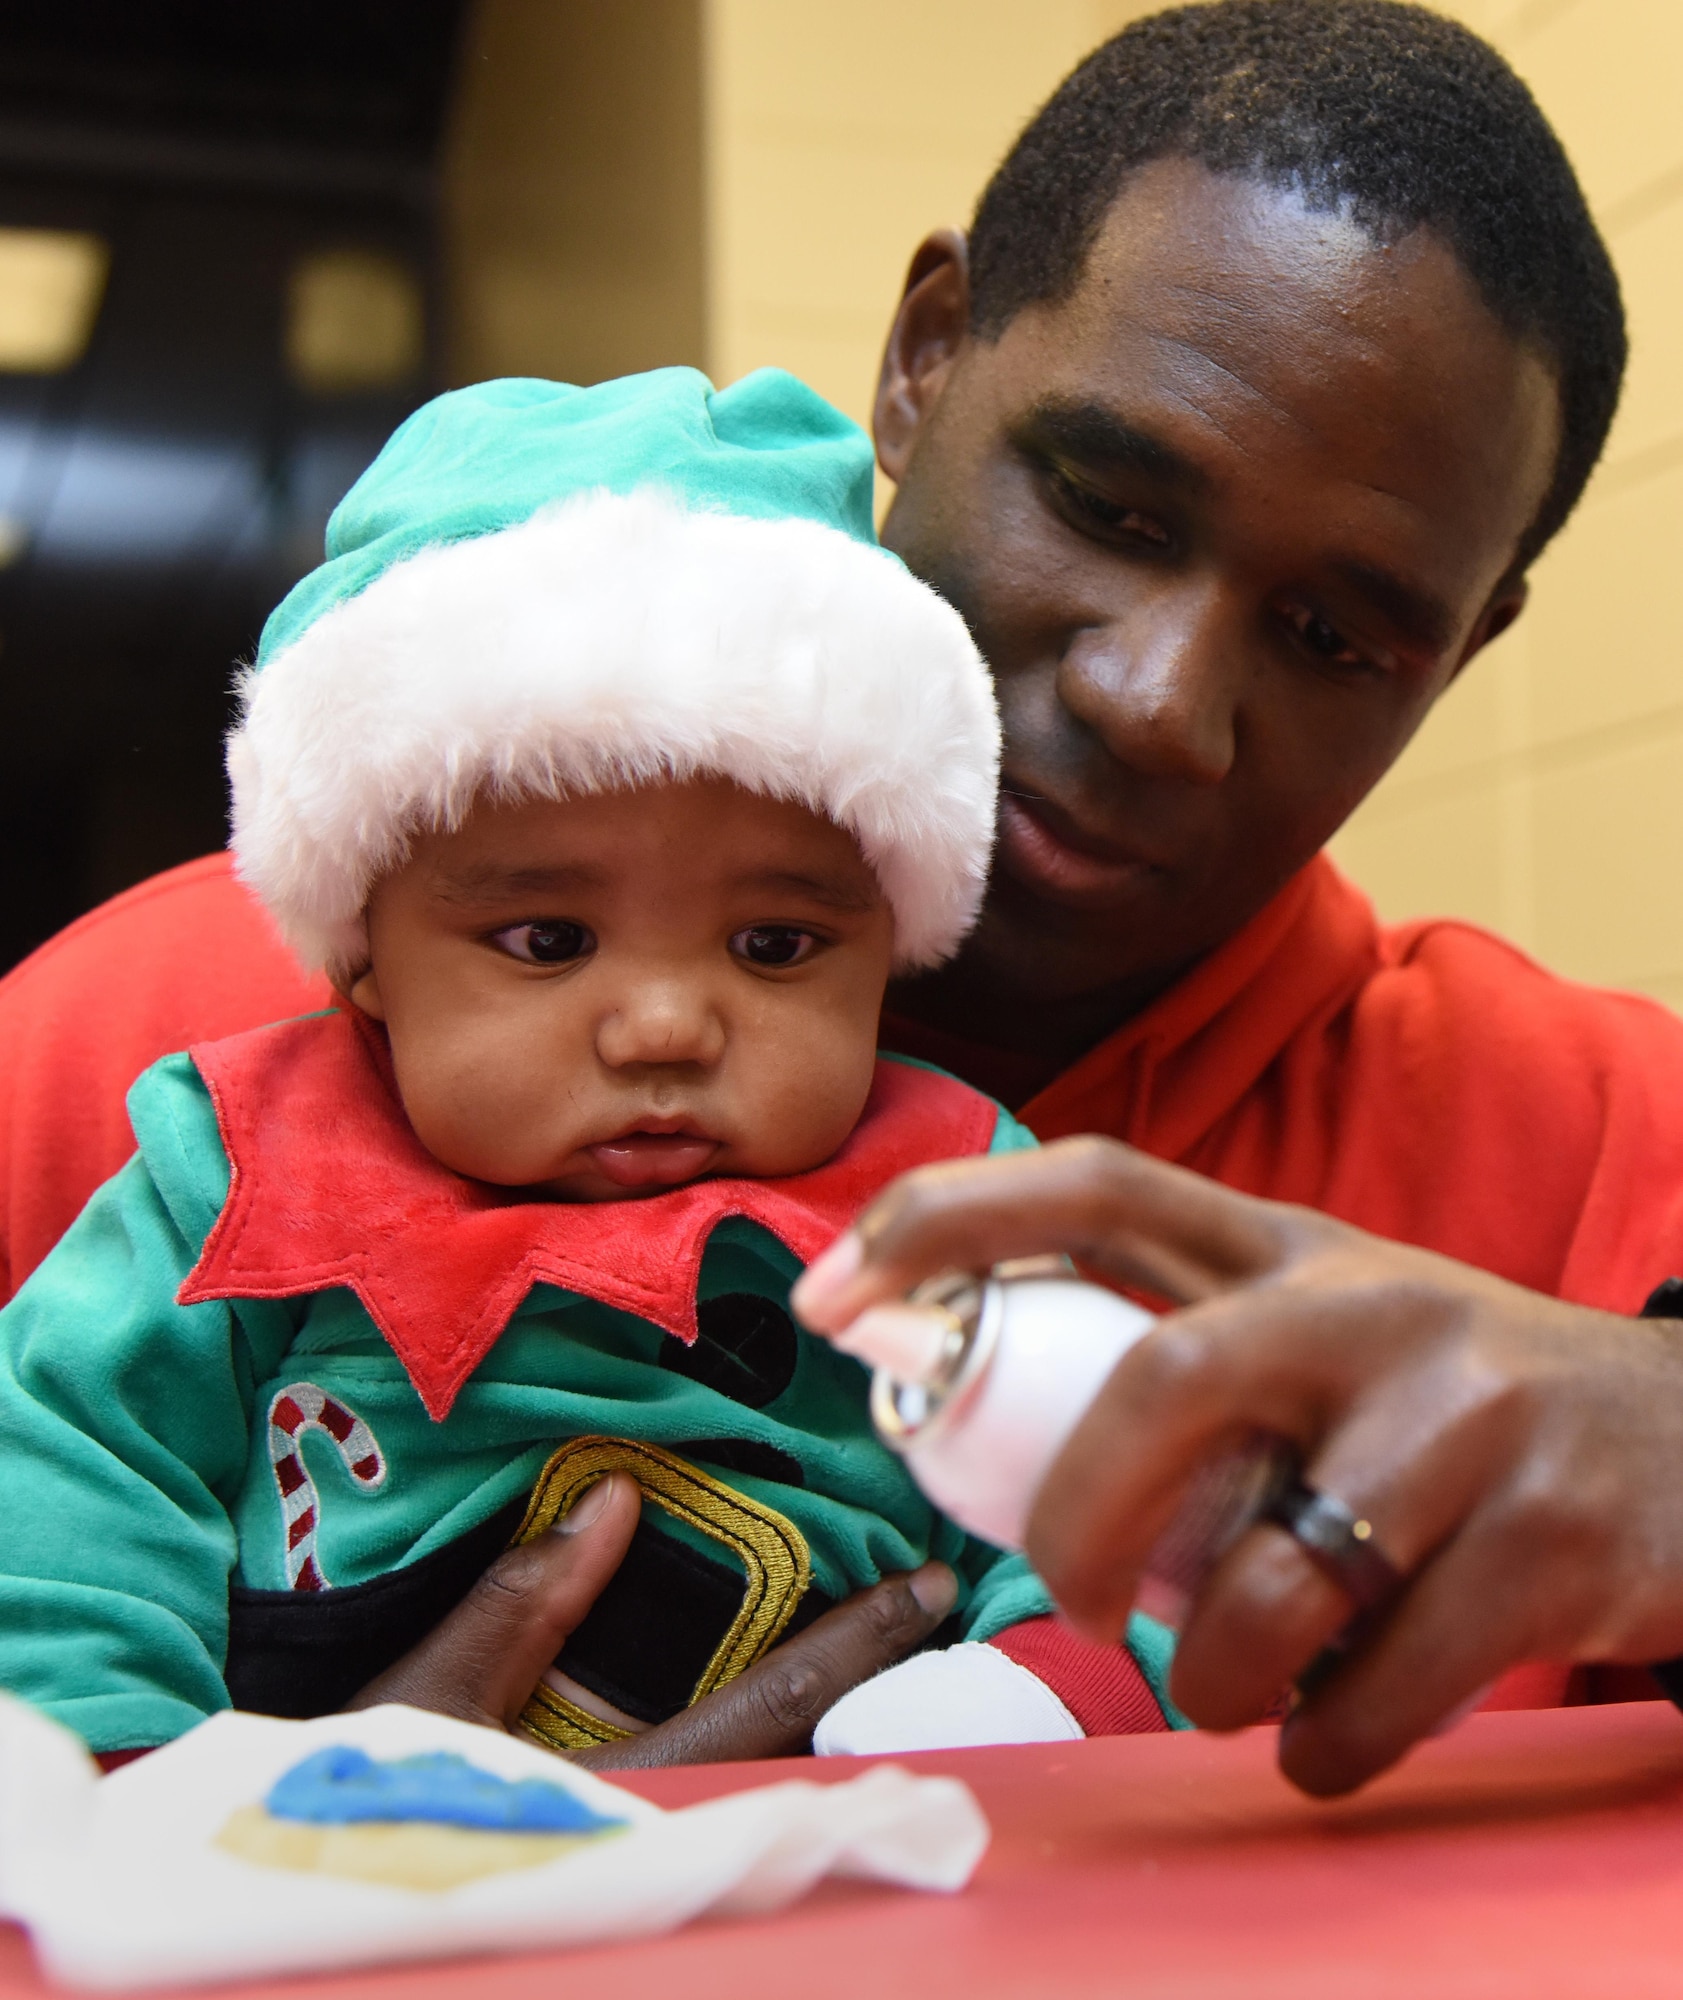 Airman 1st Class, Rapheal Davis, 403rd Wing aerospace medical technician, helps his son, Ayden, decorate a cookie during Keesler’s annual Christmas in the Park celebration at Marina Park Dec. 1, 2016, on Keesler Air Force Base, Miss. The event, hosted by Outdoor Recreation, also included a tree lighting ceremony, tour train rides, ornament decorating, and visits with Santa. (U.S. Air Force photo by Kemberly Groue)